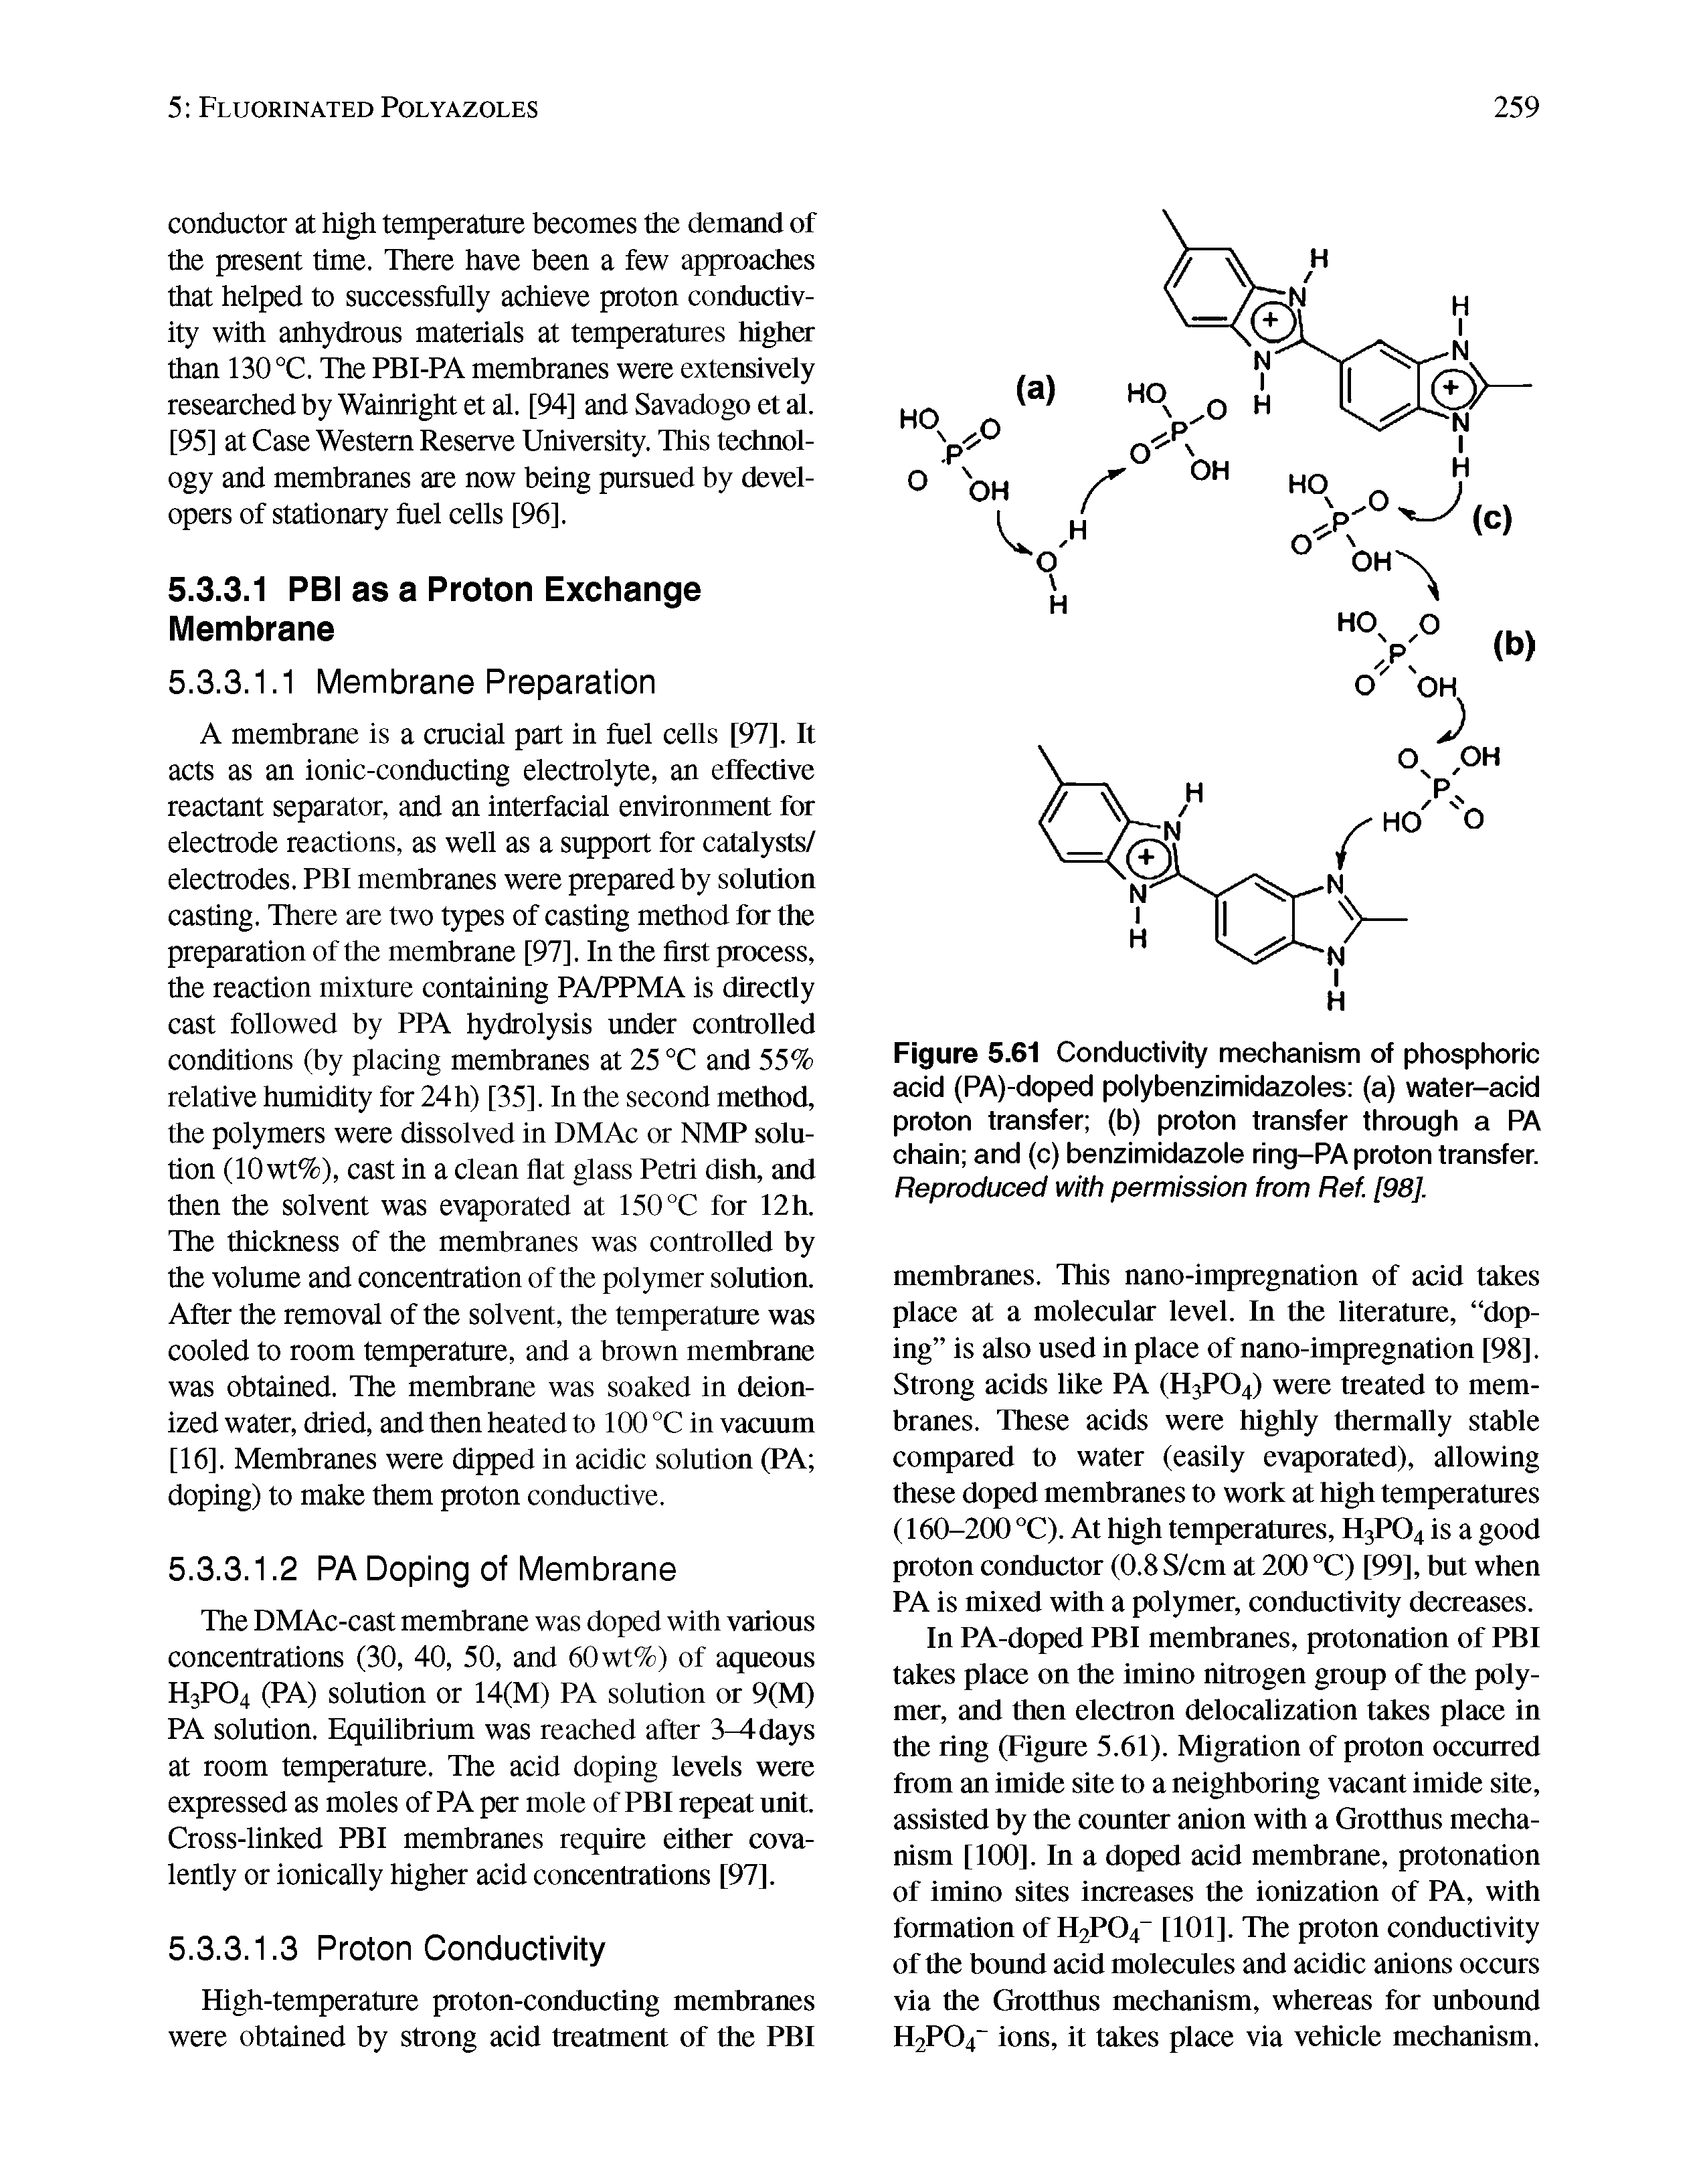 Figure 5.61 Conductivity mechanism of phosphoric acid (PA)-doped polybenzimidazoles (a) water-acid proton transfer (b) proton transfer through a PA chain and (c) benzimidazole ring-PA proton transfer. Reproduced with permission from Ref. [98],...